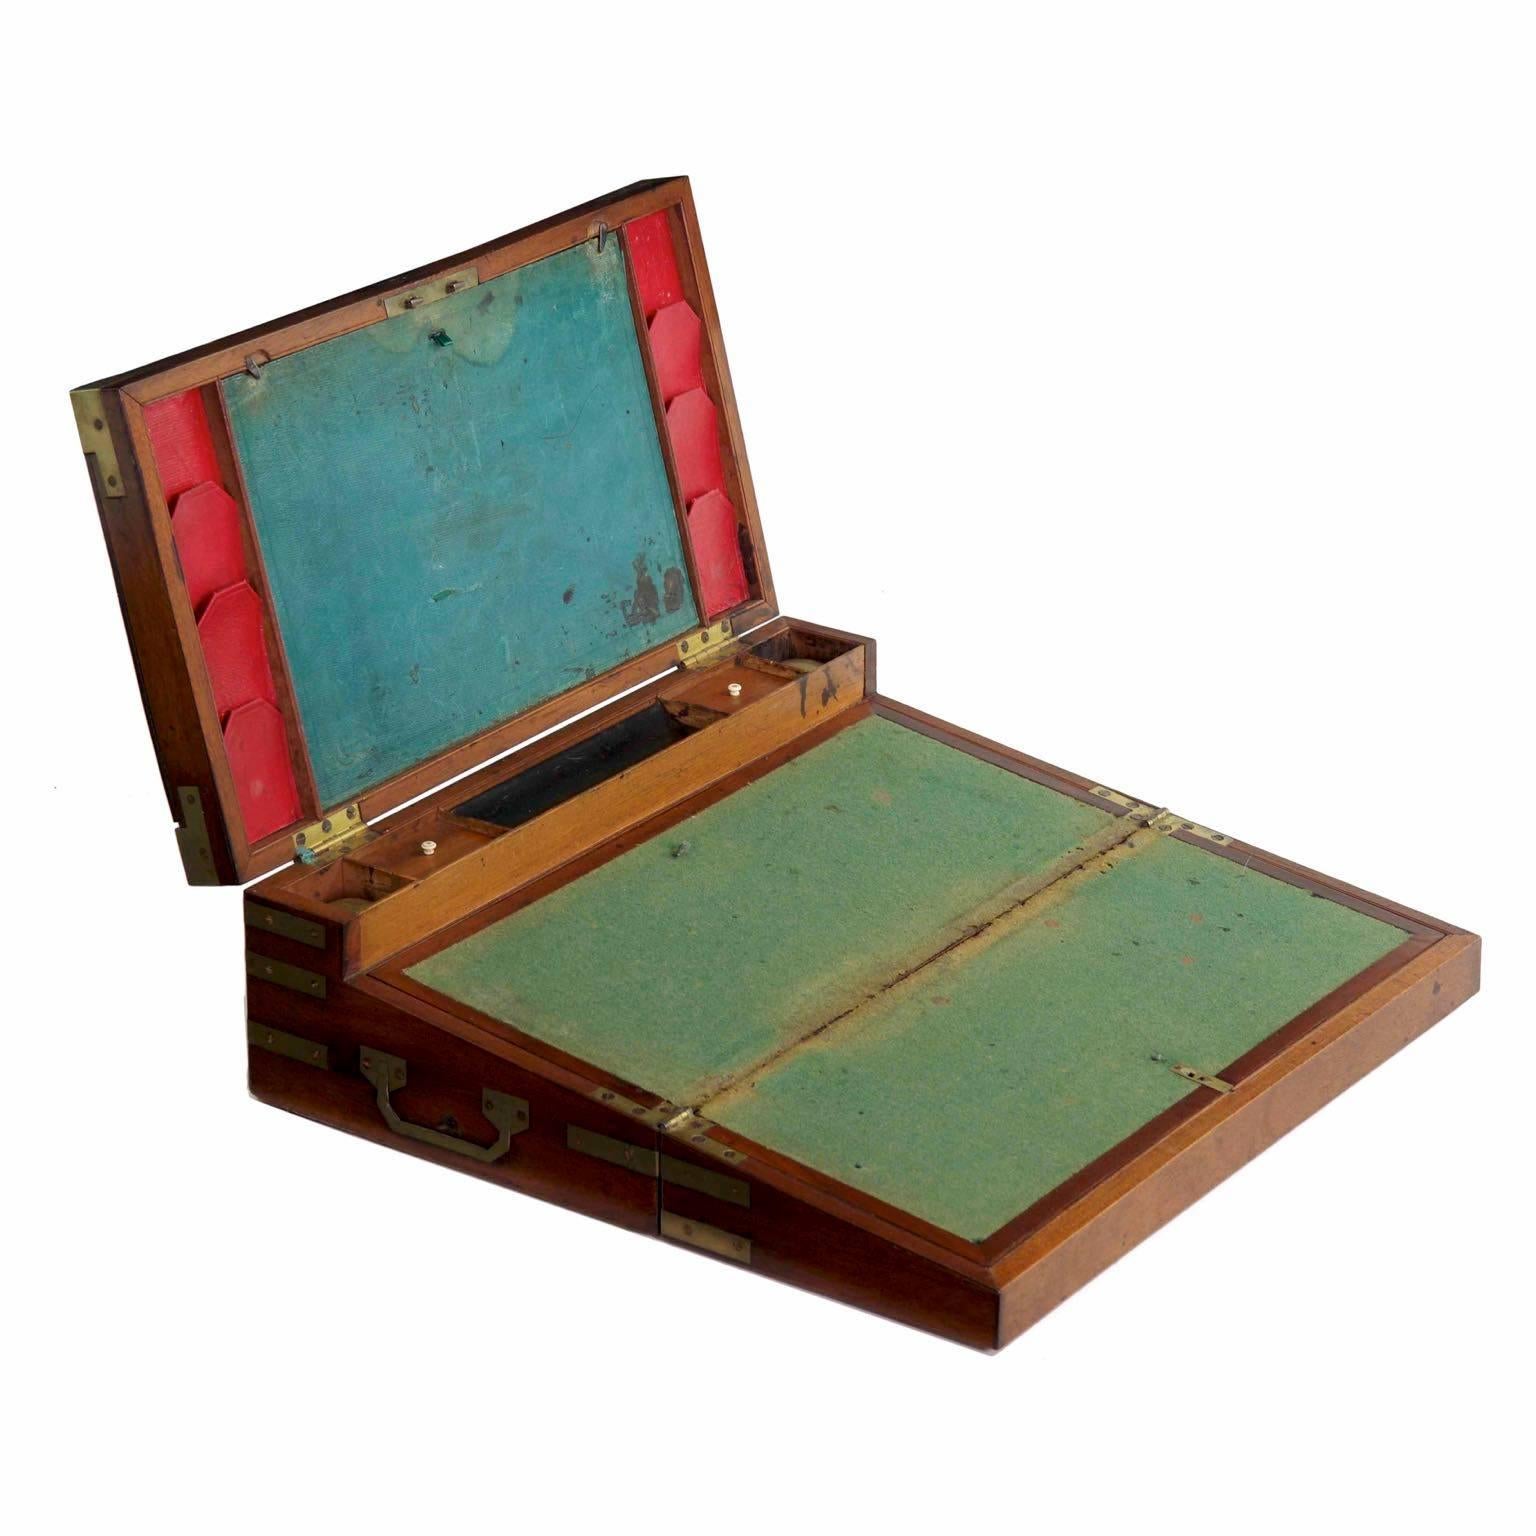 George III Period Brass-Bound Campaign Writing Slope "Captain's Box", circa 1790